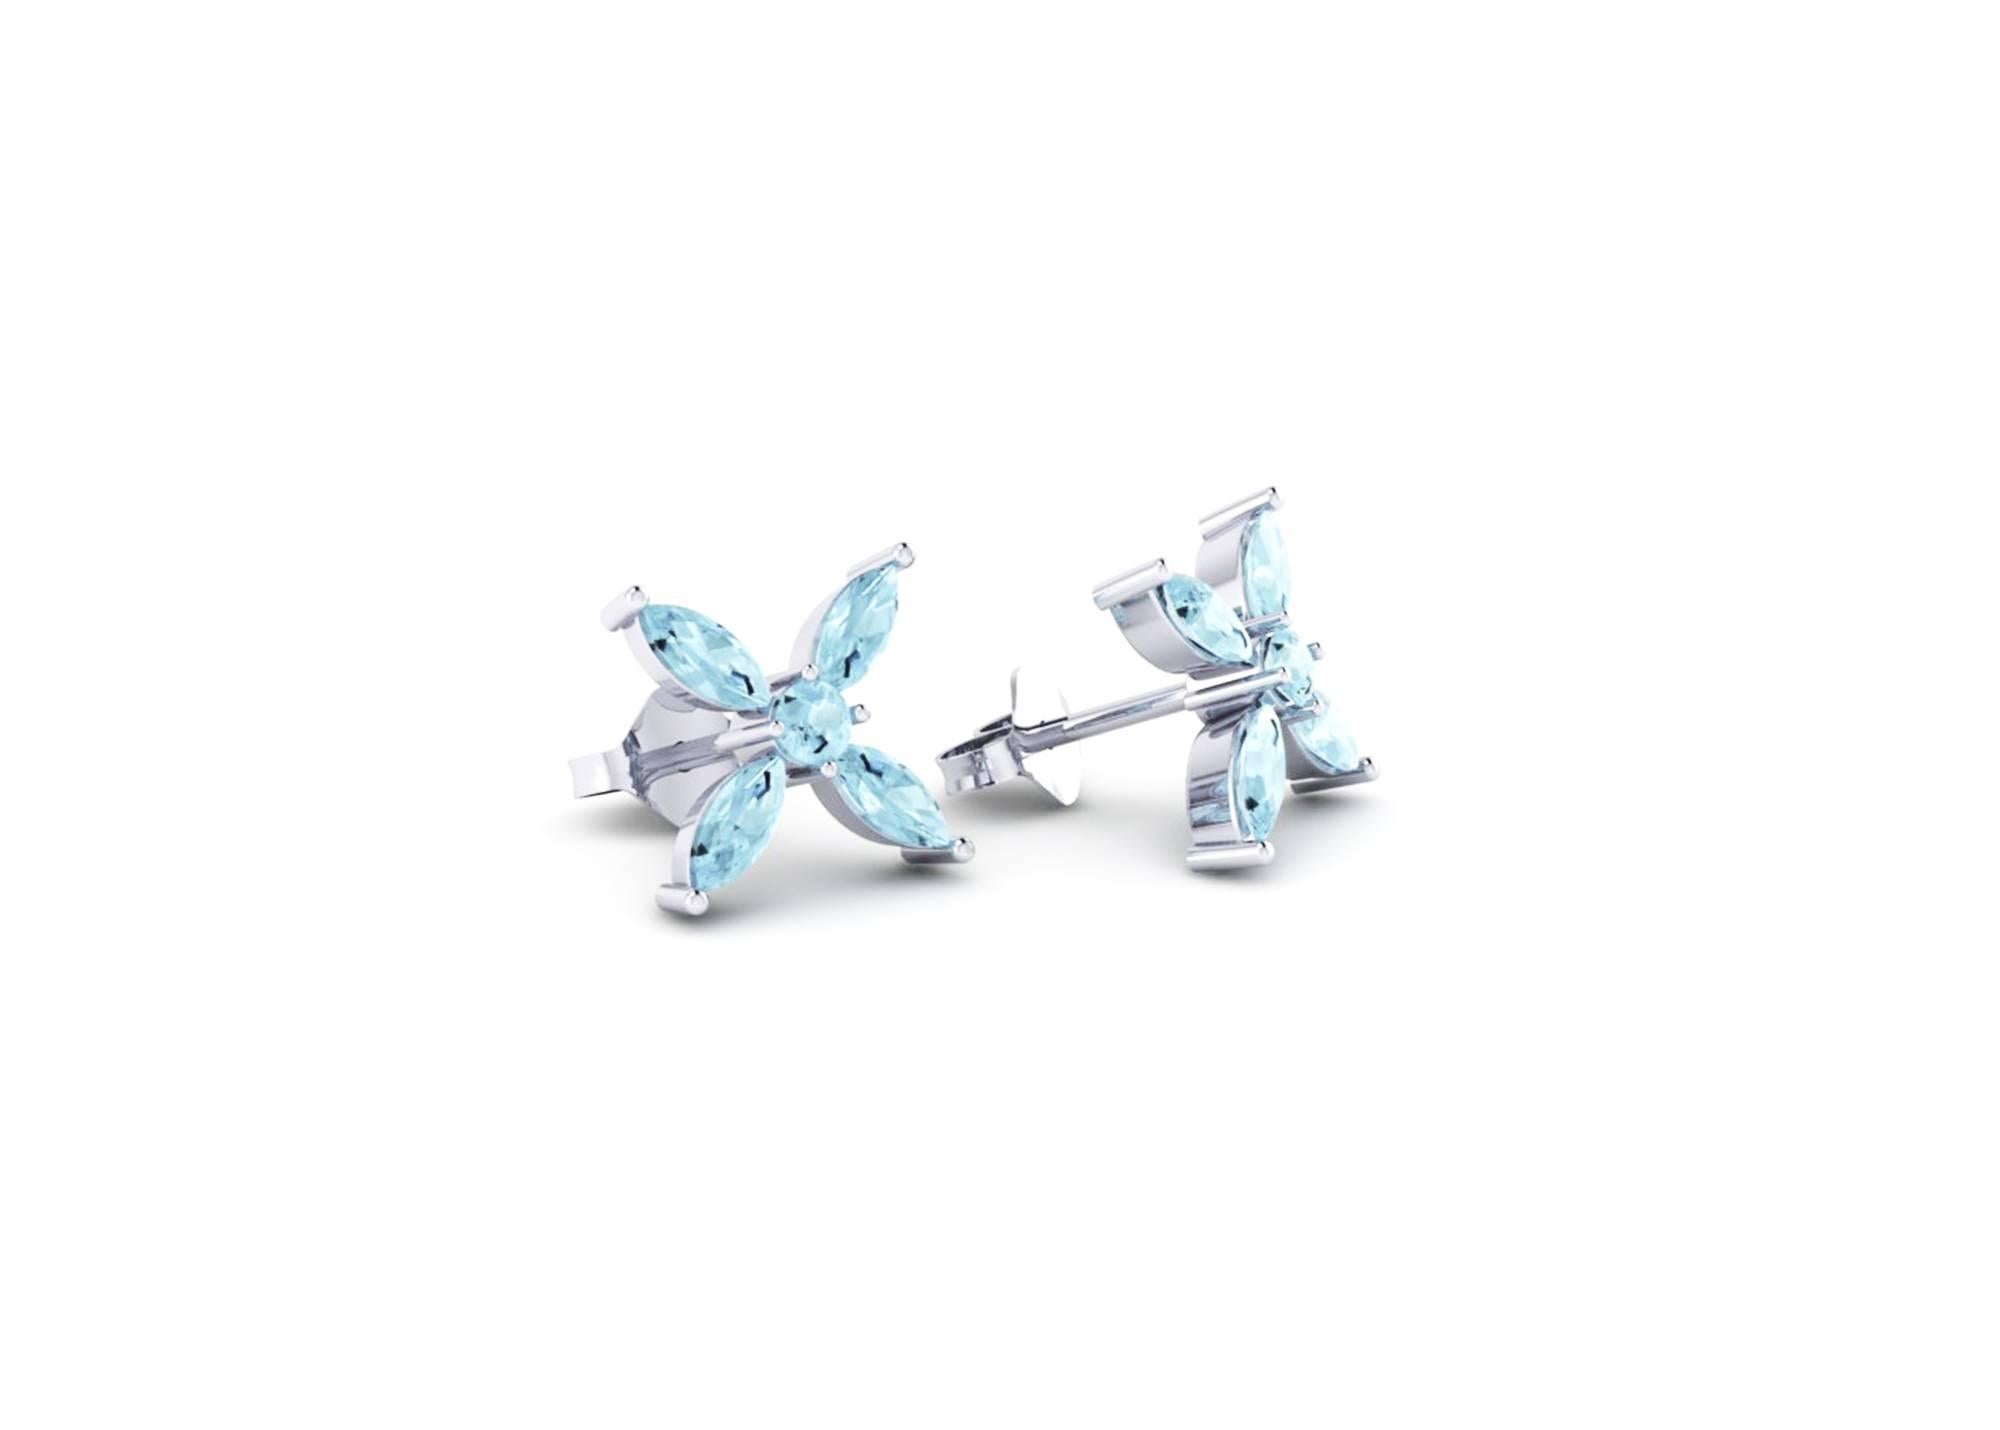 Ferrucci Aquamarine Marquise Flower Earrings in 18k white gold mounting, made in New York City by Italian master jeweler, fresh look perfect for spring and summer, a pret a porter design for every day and night.

The earrings have push back posts,